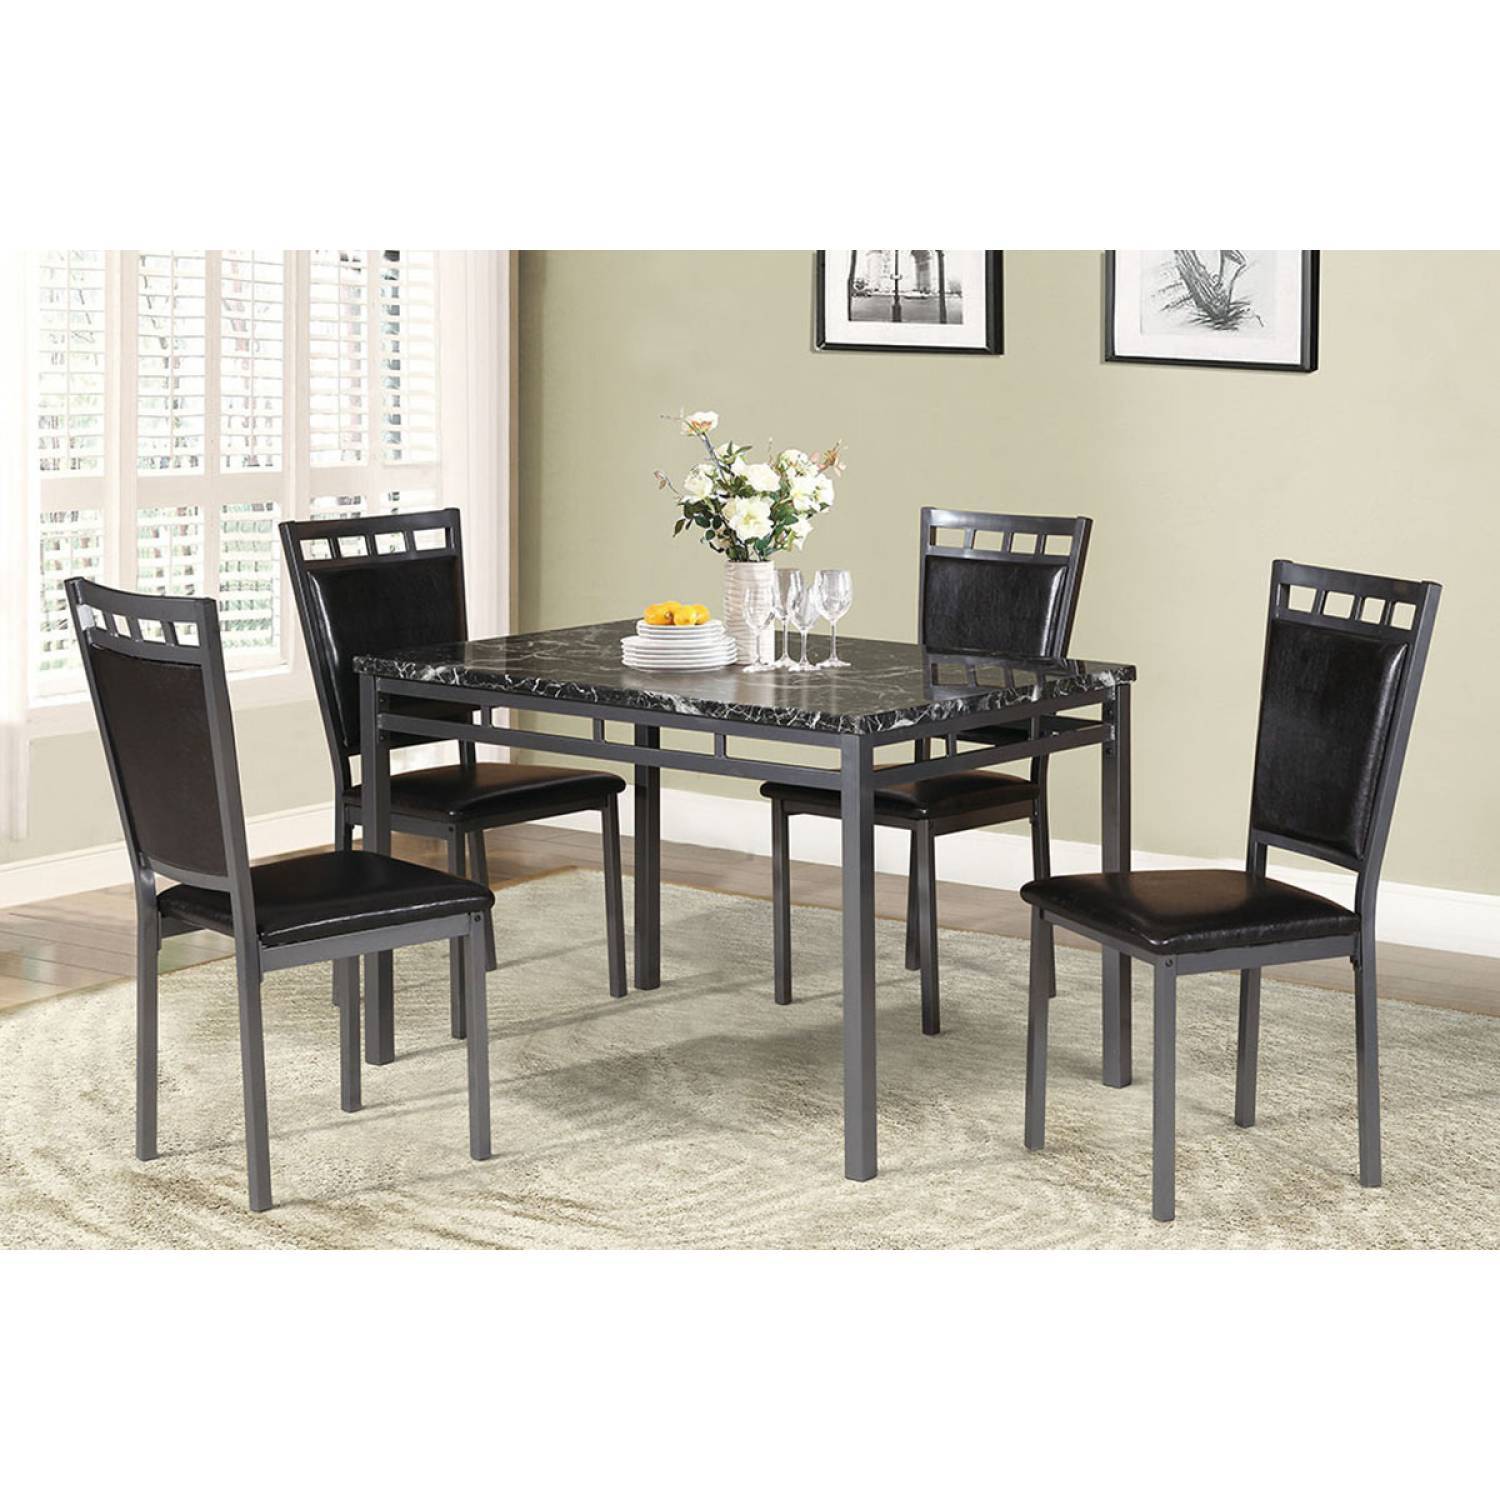 Dining Room Furniture 5pc Dining Set Table And 4x espresso-seats 4-metal-dining room-48